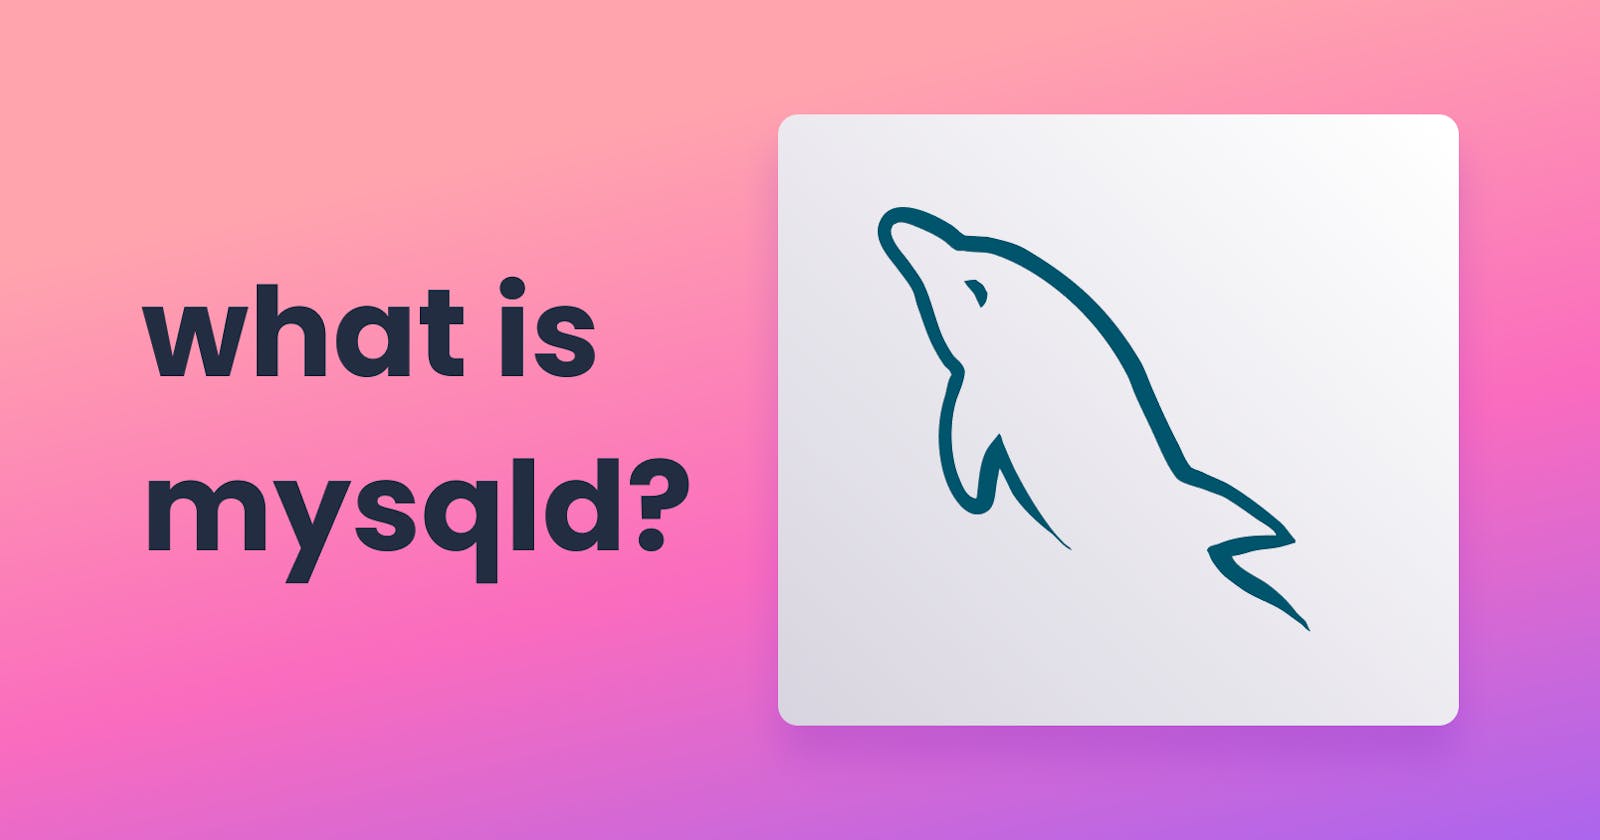 What is mysqld?